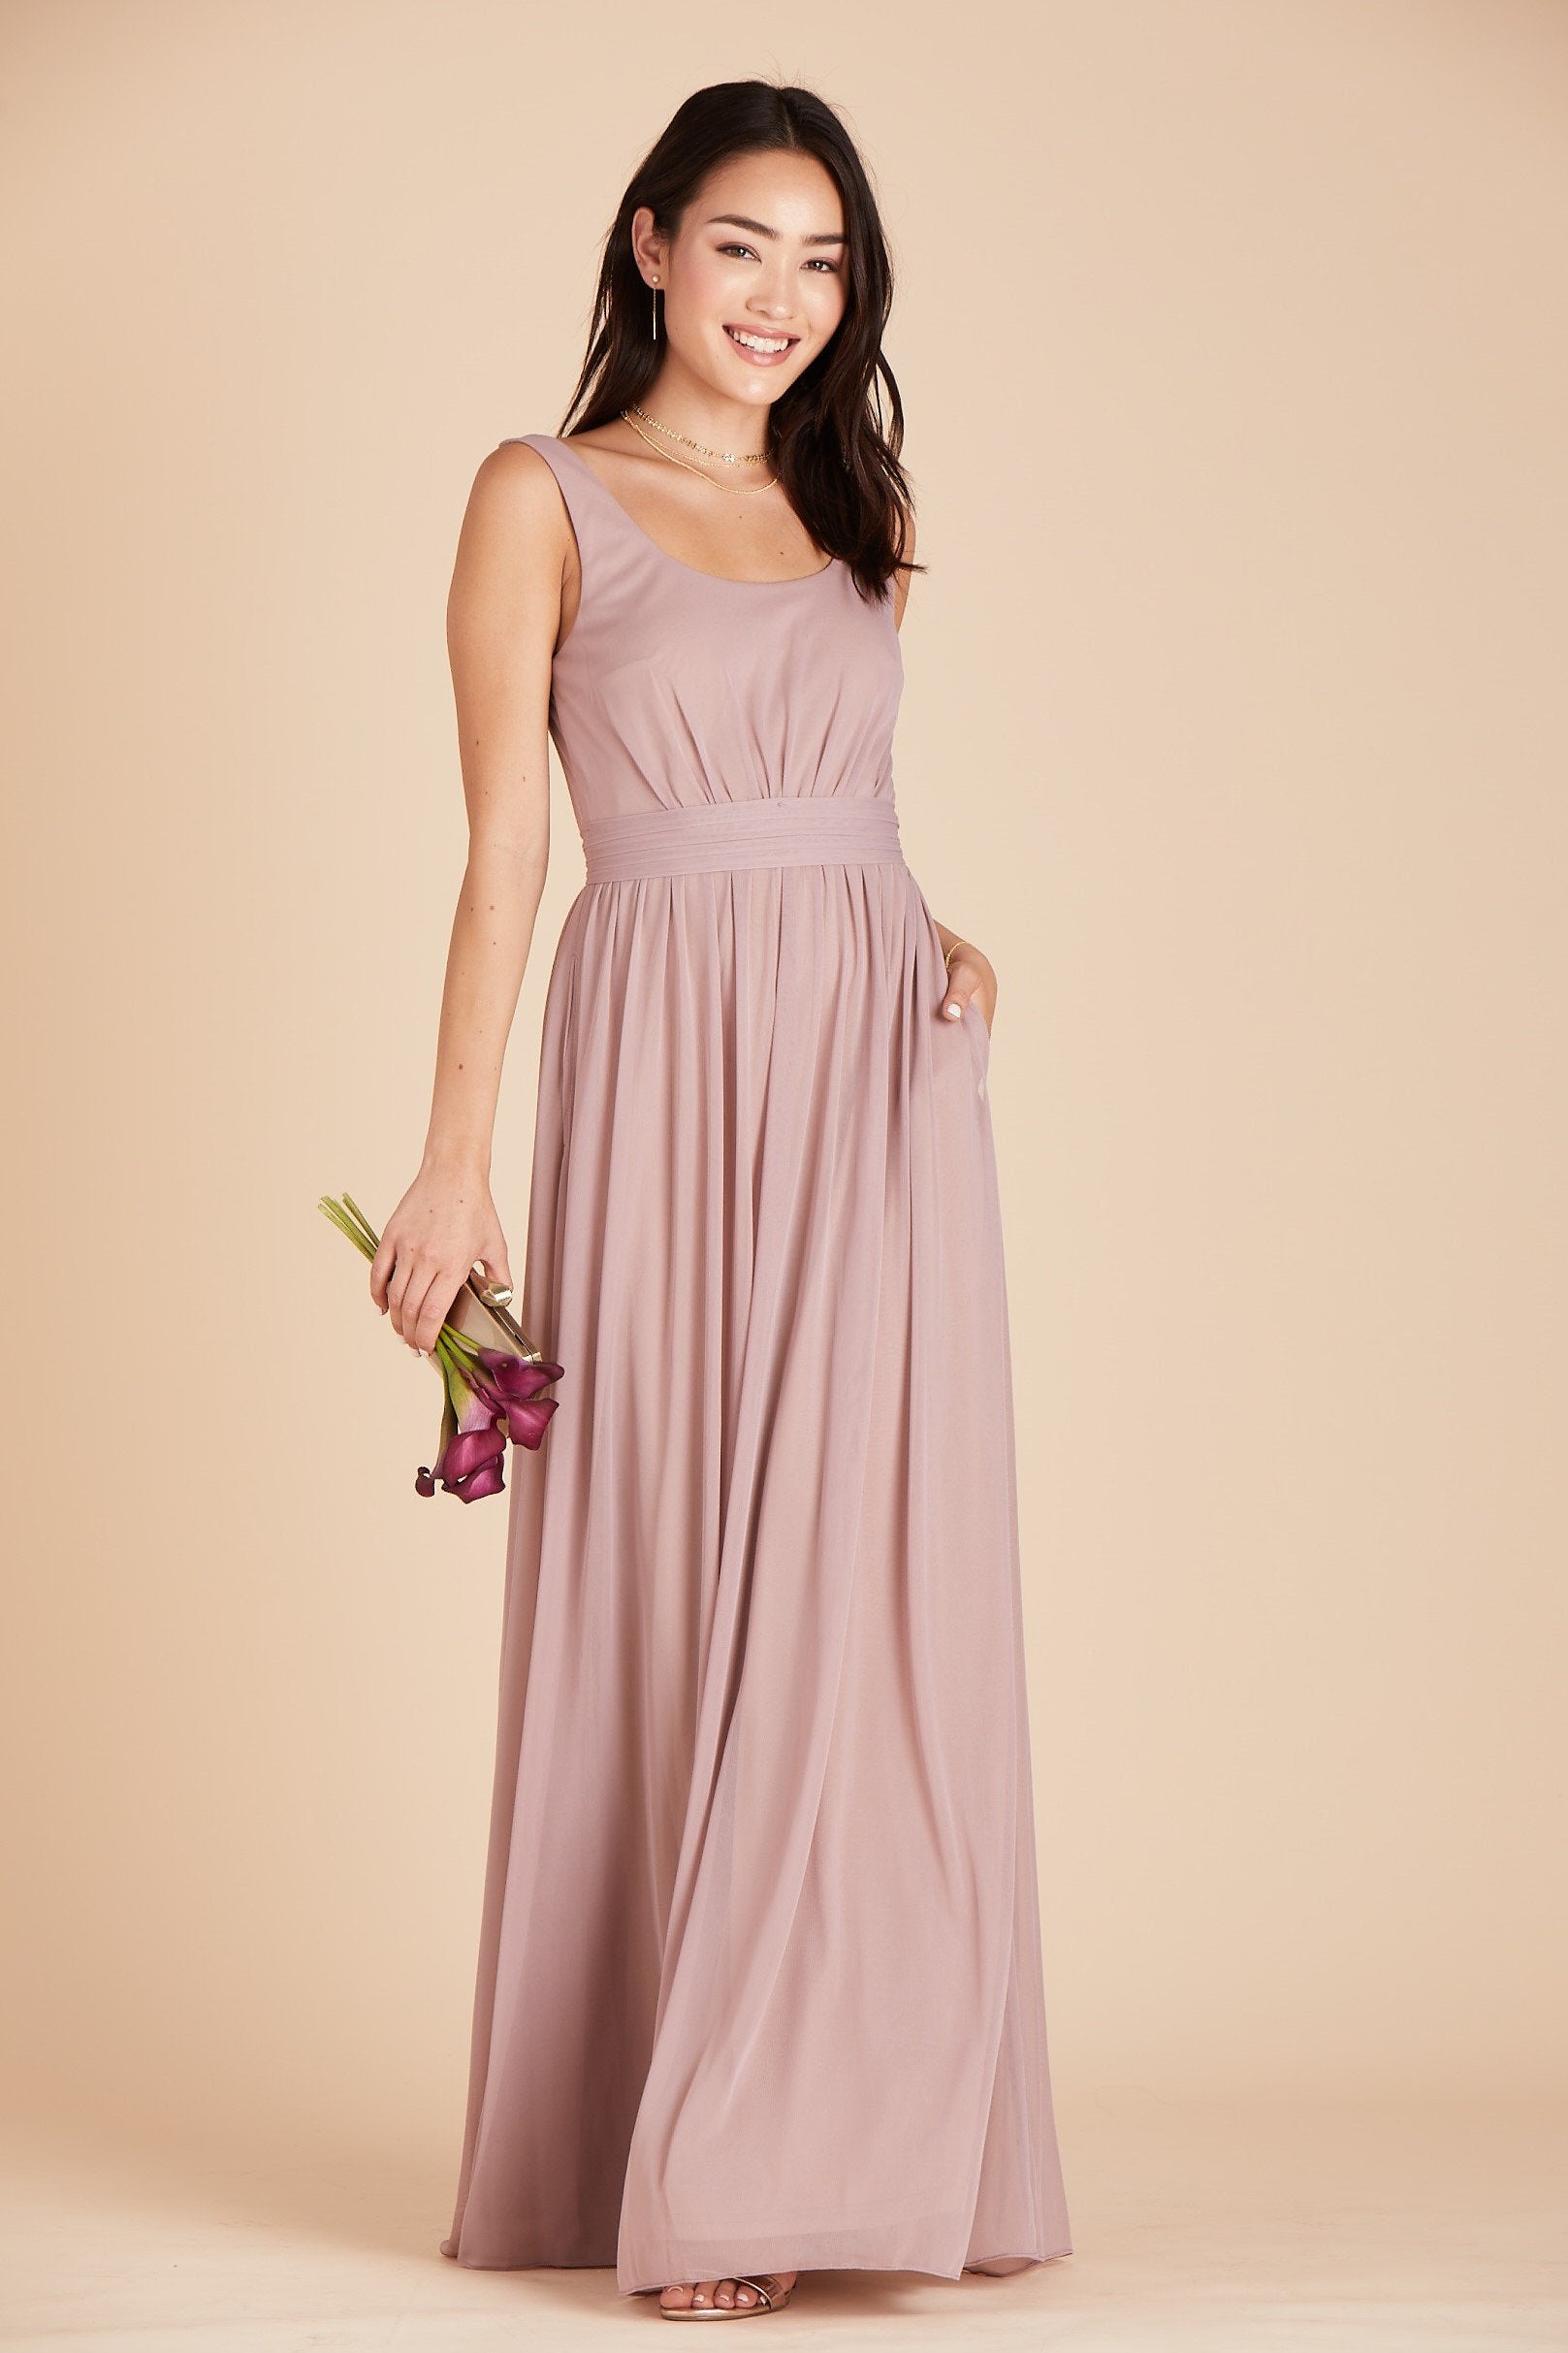 Jay bridesmaids dress in mauve chiffon by Birdy Grey, front view with hand in pocket